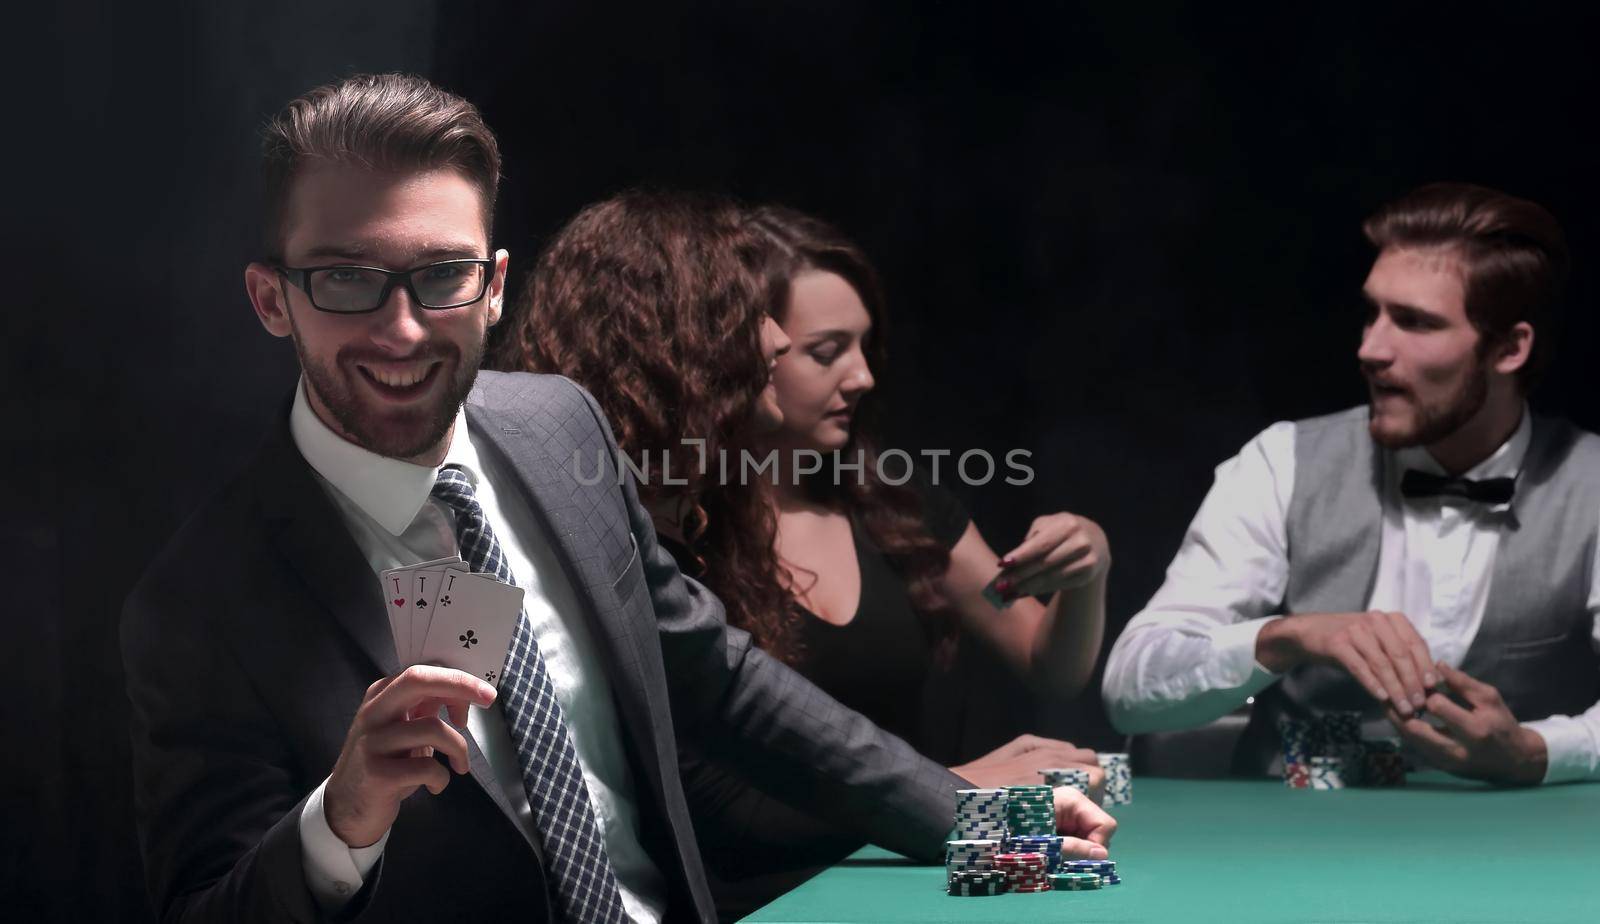 background image. game of poker. by asdf